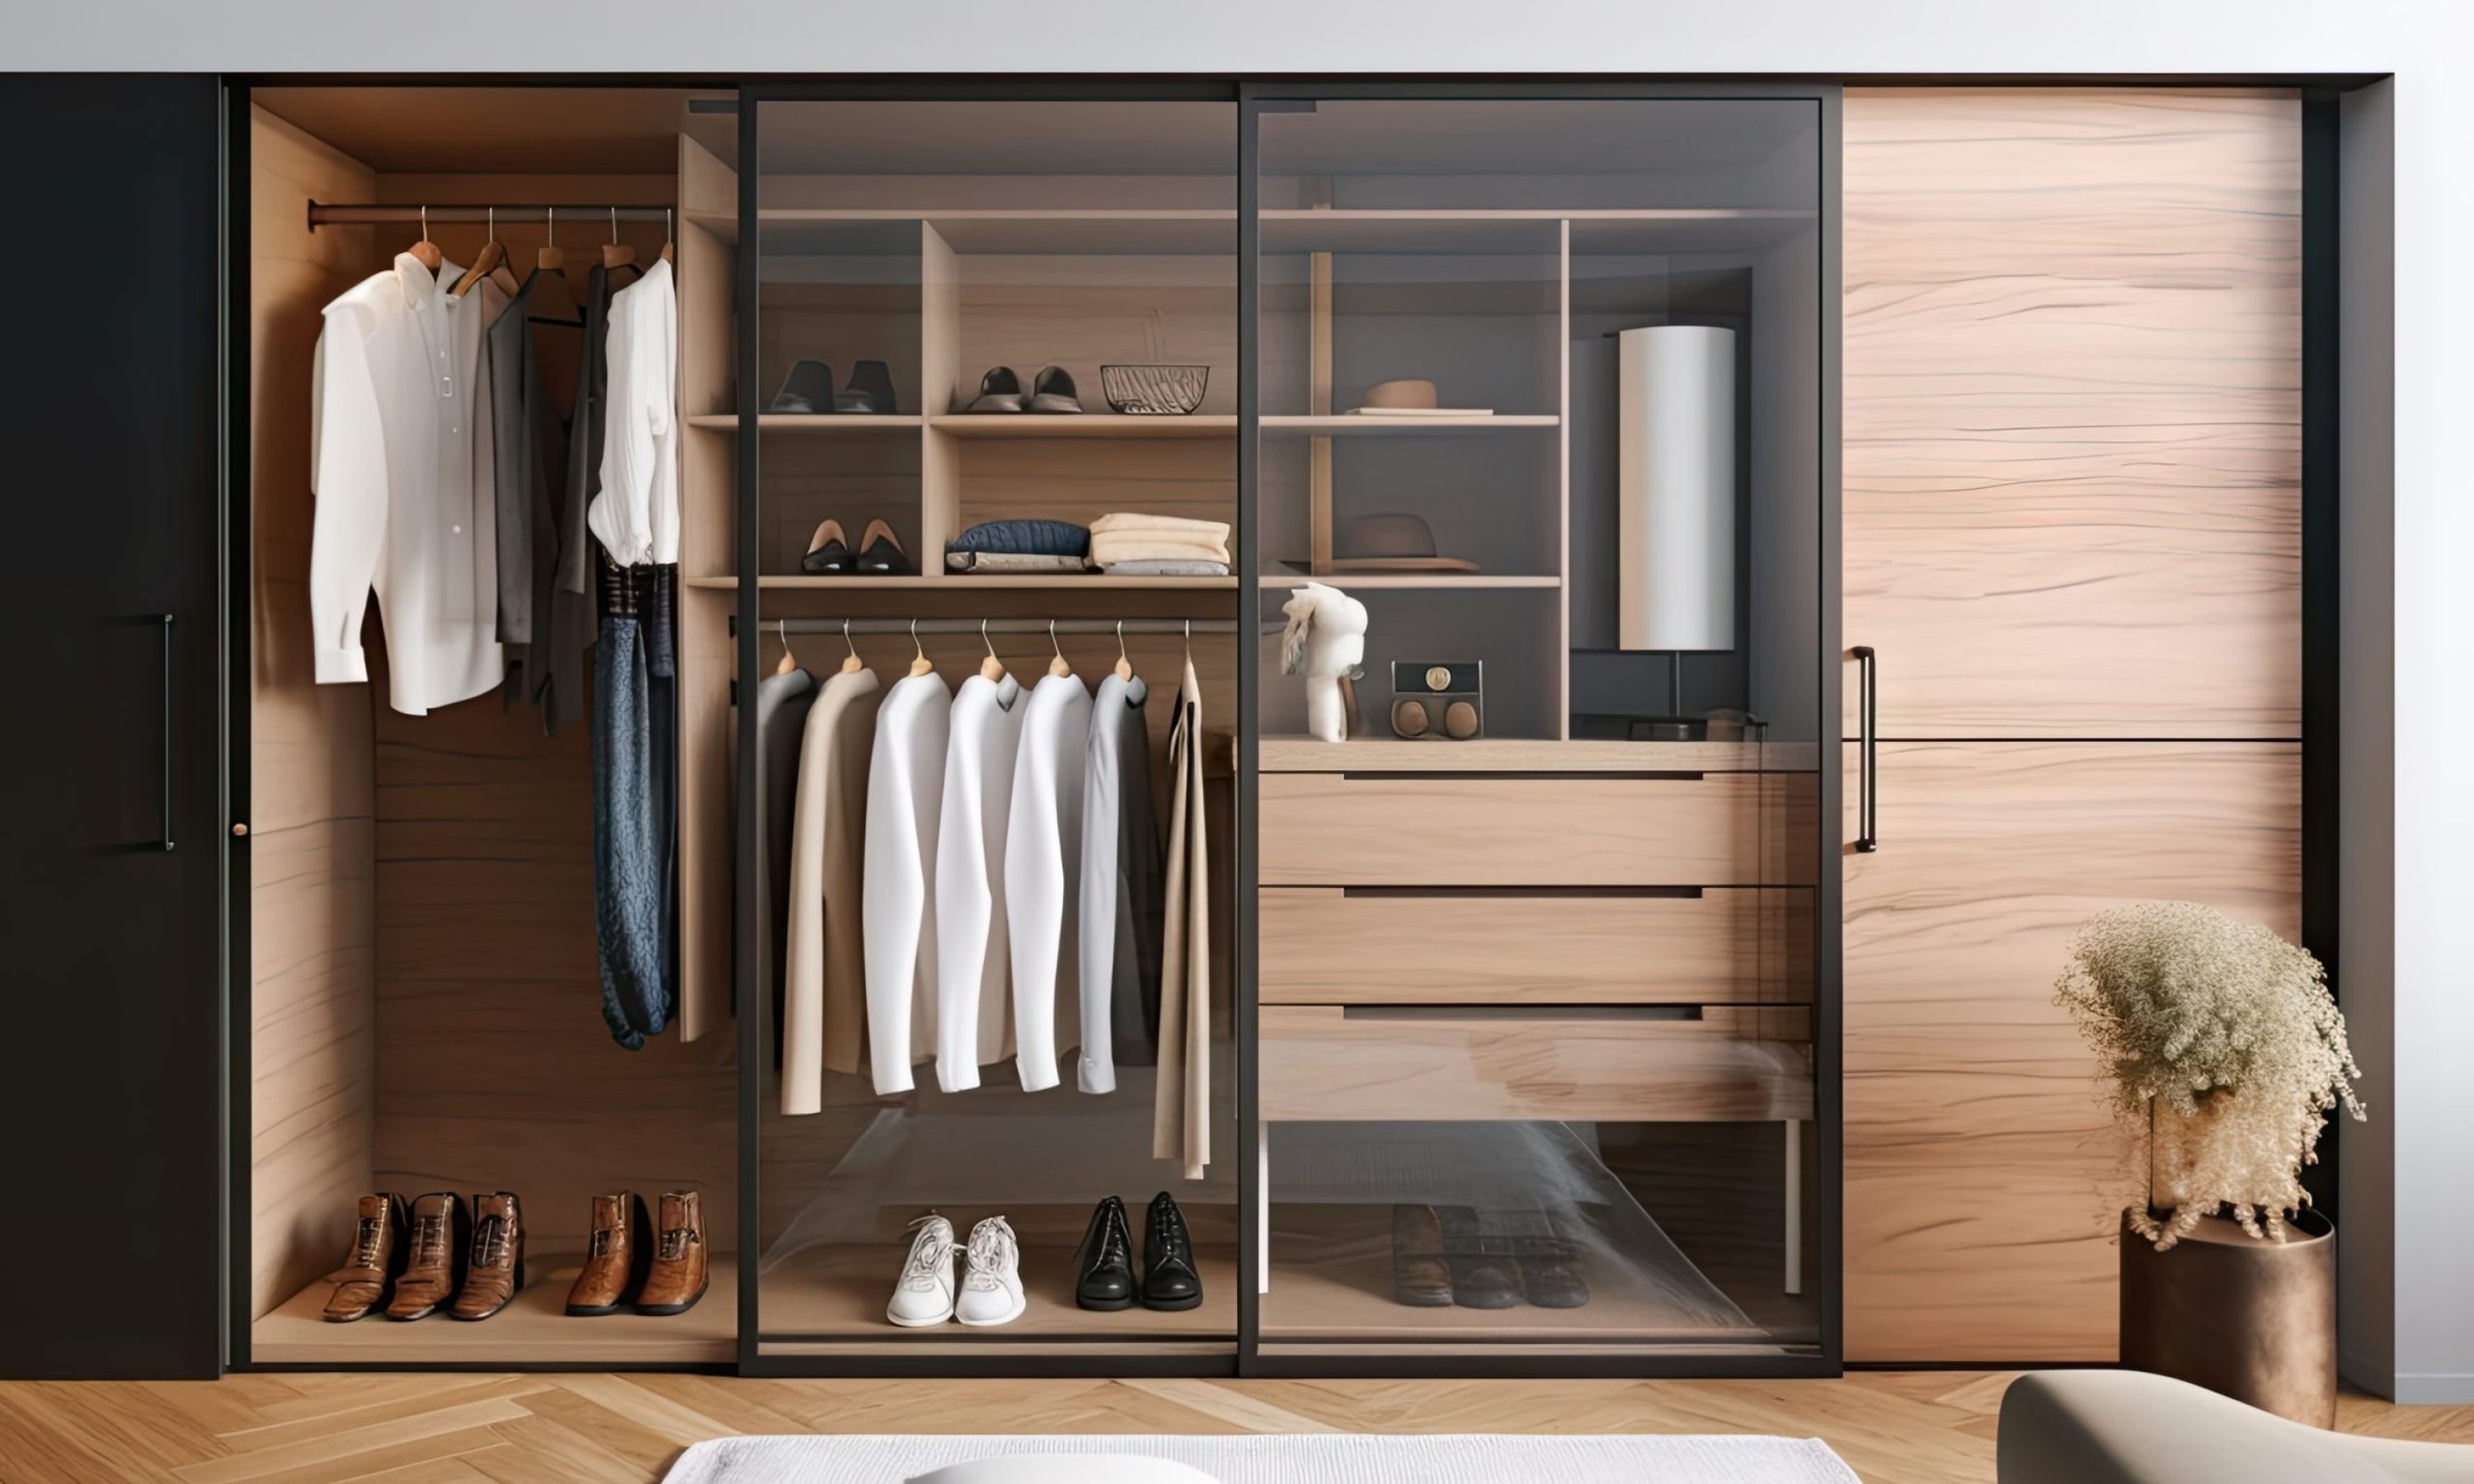 Dressing room in a modern style, minimalist design, copy space.